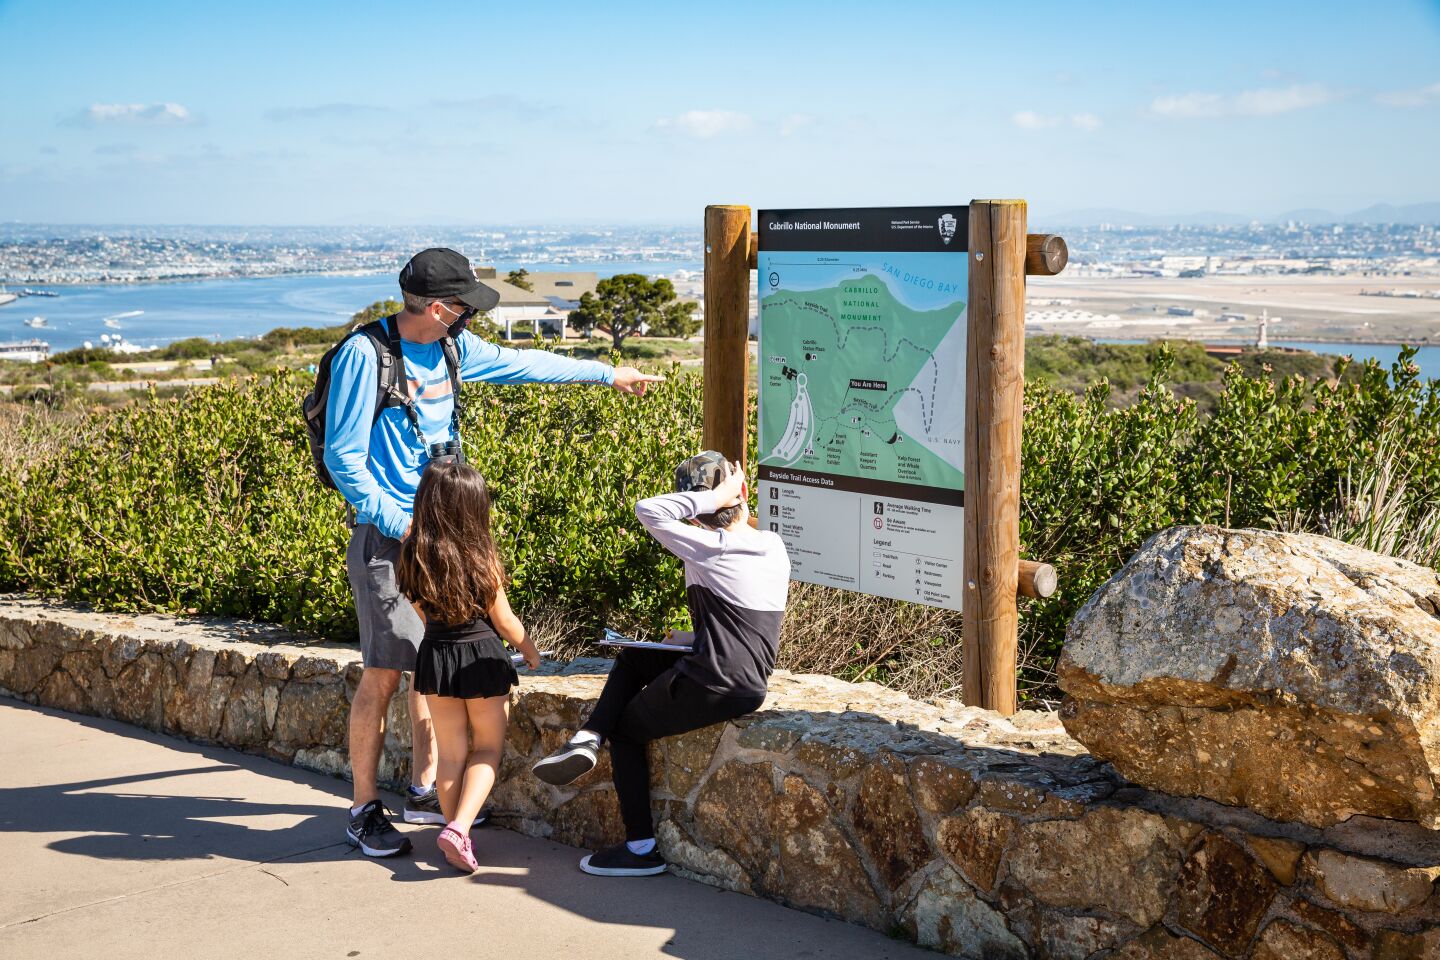 Adam Riffe with daughter Tiffany and son Zachary check out a map at Cabrillo National Monument.